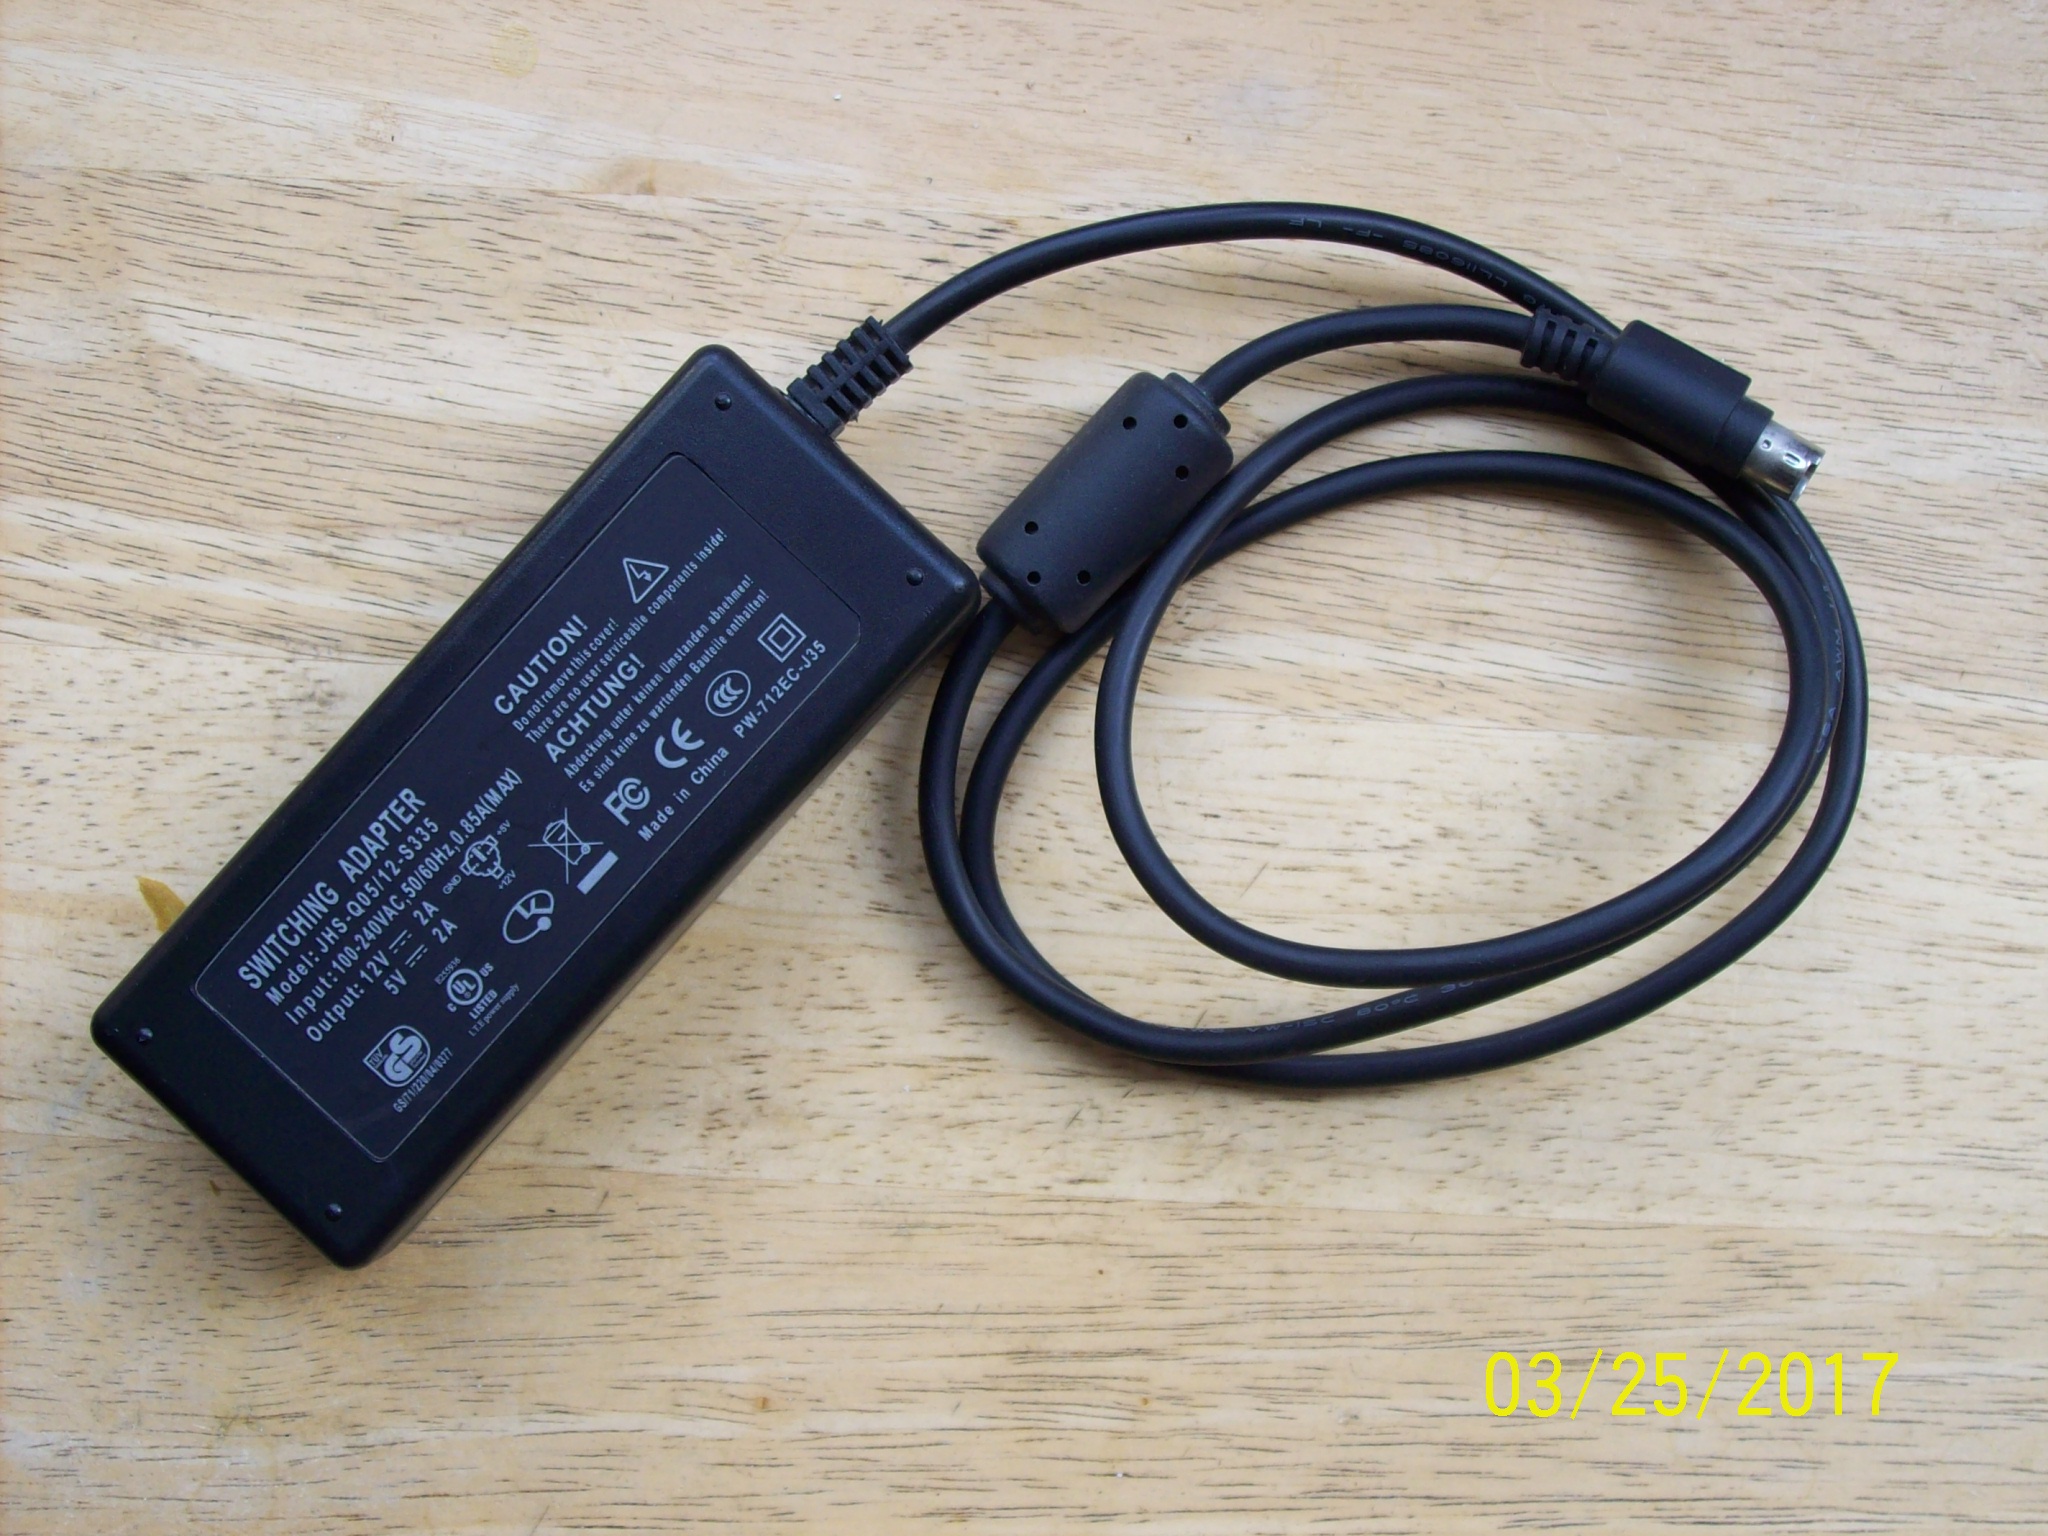 Switching Adapter-JHS-Q05/12-S335- Output: 12v 2a/5v 2a